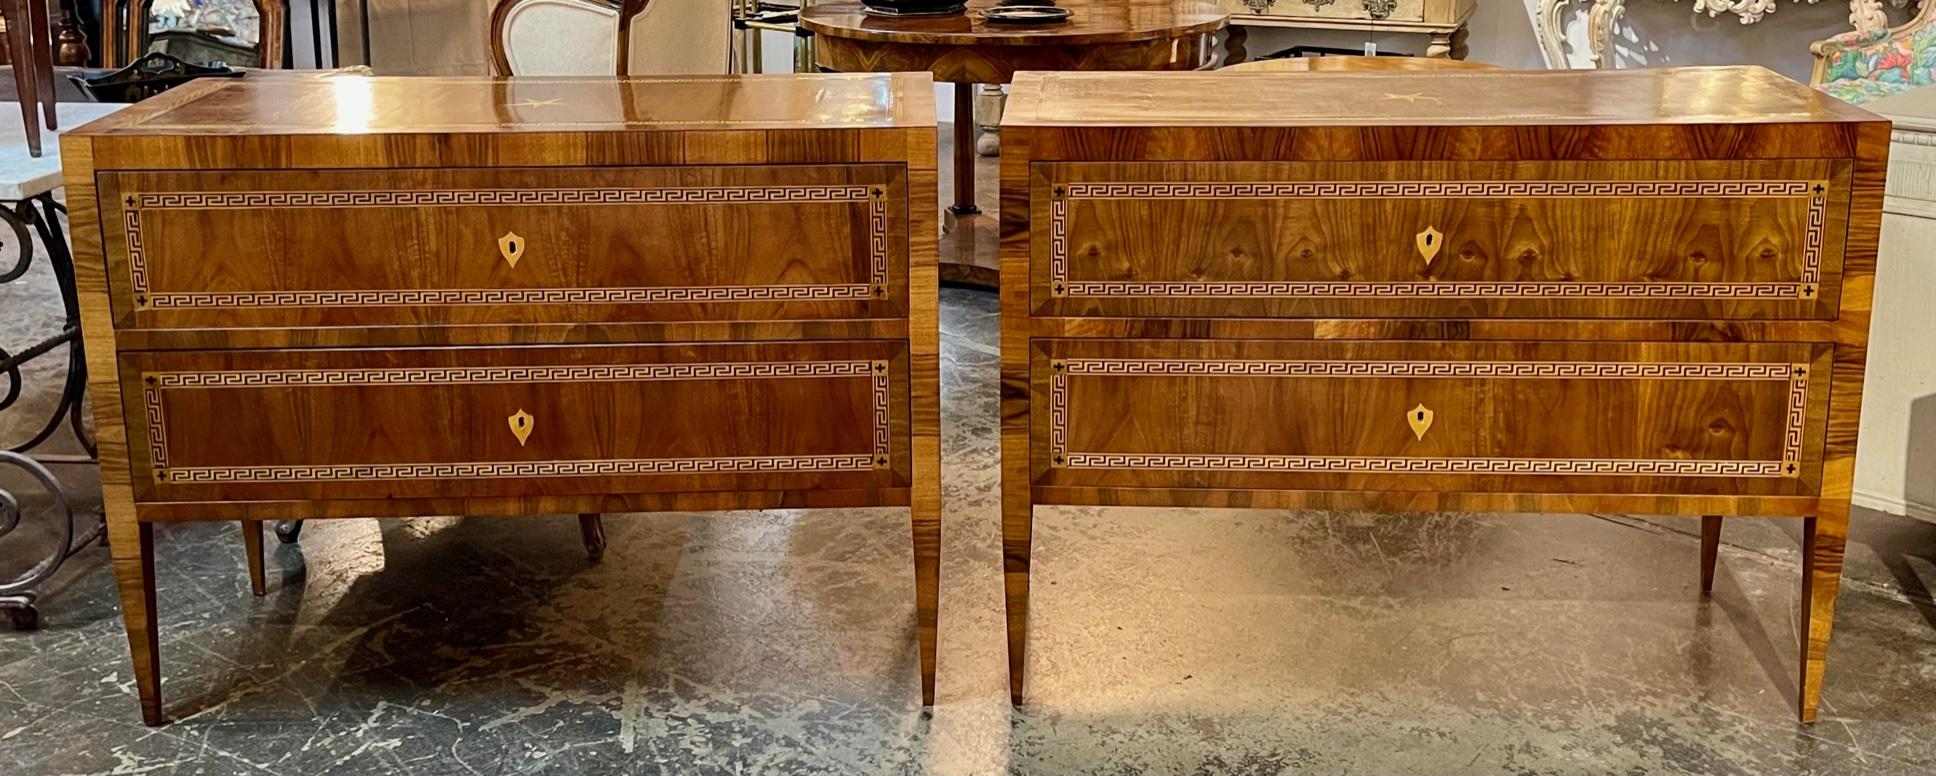 Pair of Italian high style inlaid walnut Greek Key commodes. Circa 2000. These are A favorite of top designers.